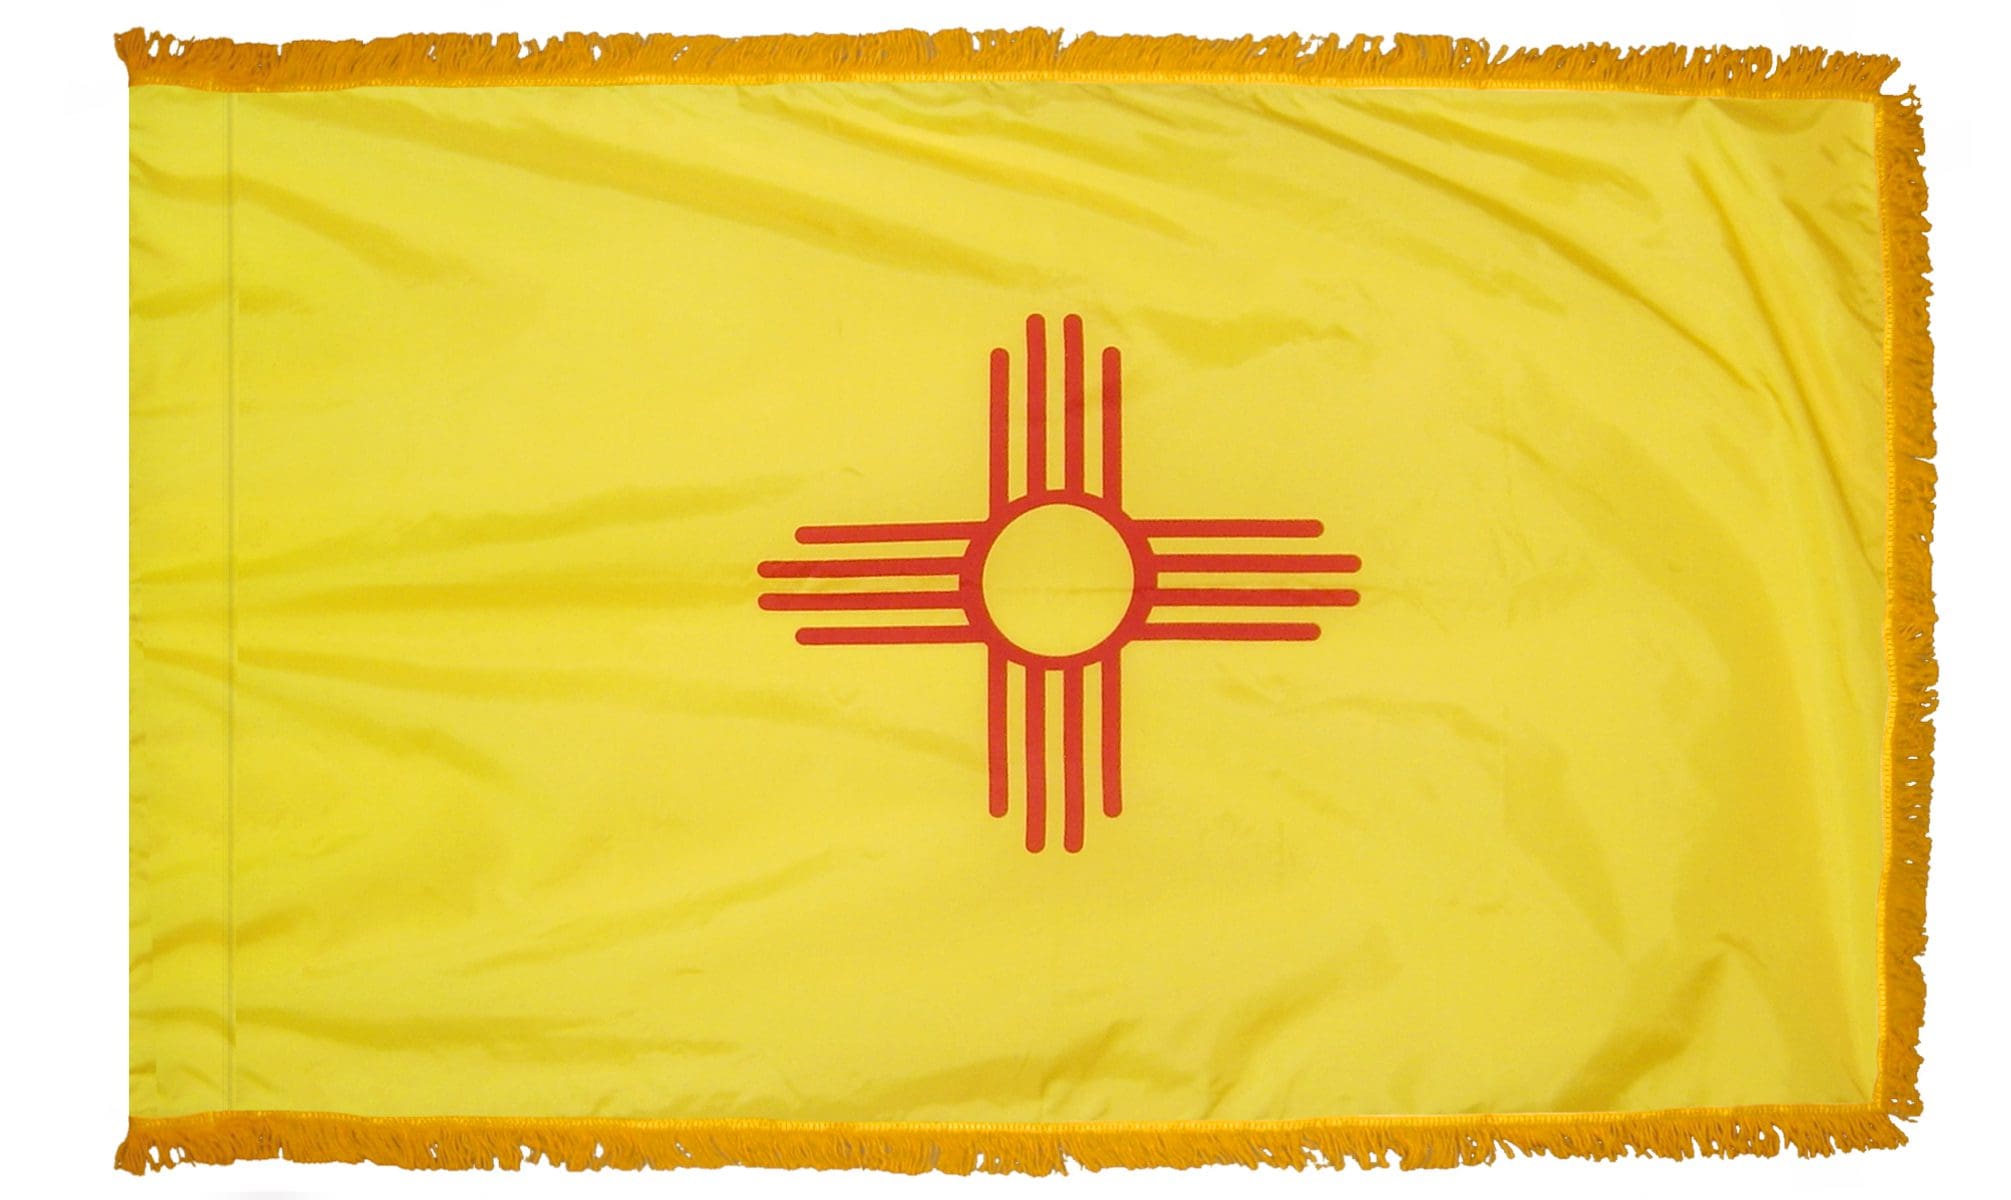 New Mexico State Flag 3x5 or 4x6 ft. (fringed)